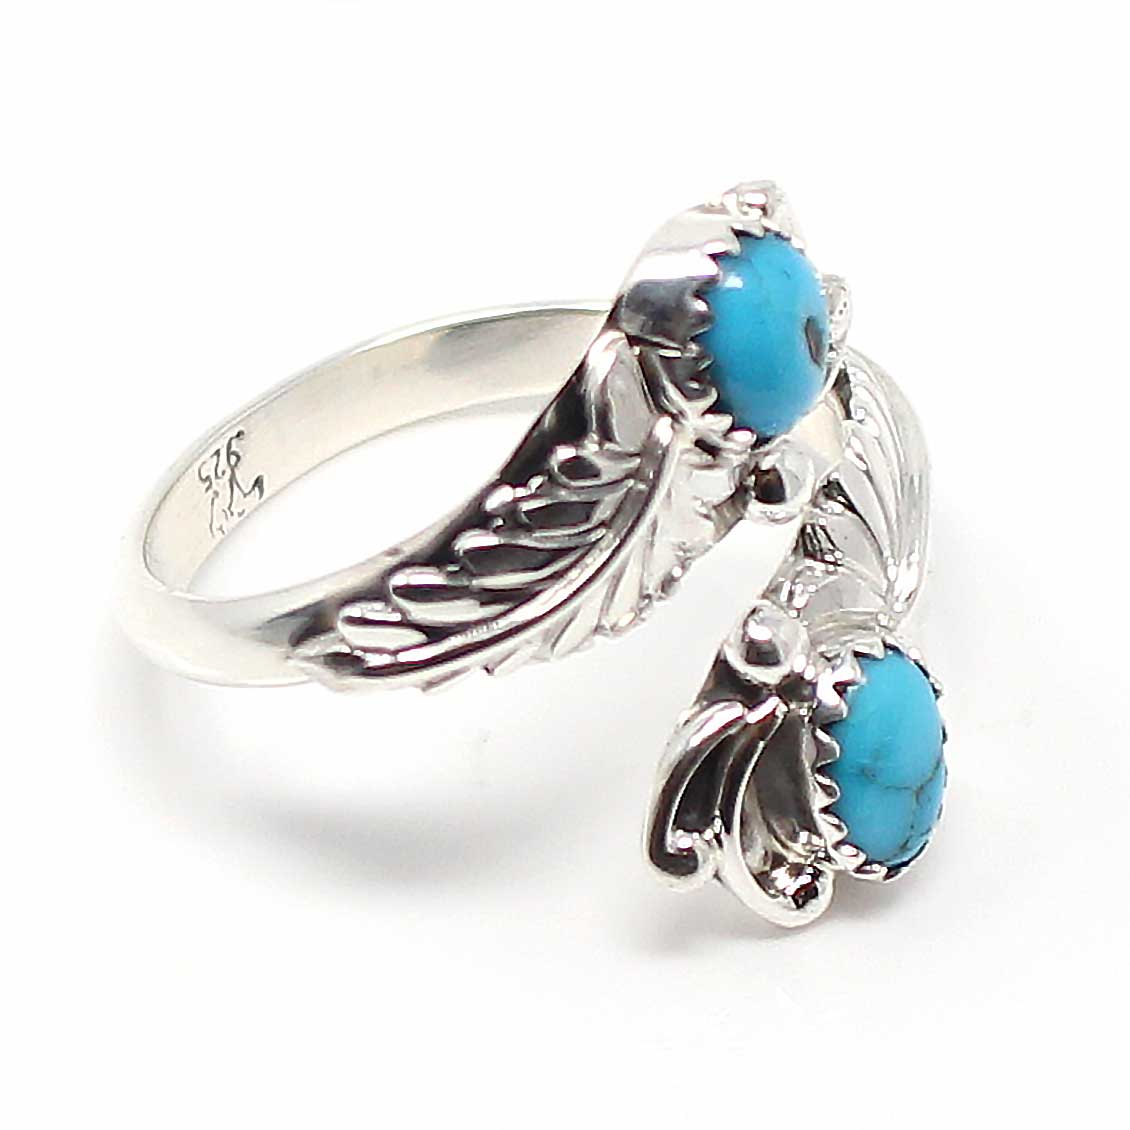 Adustable Sterling Silver & Turquoise Ring